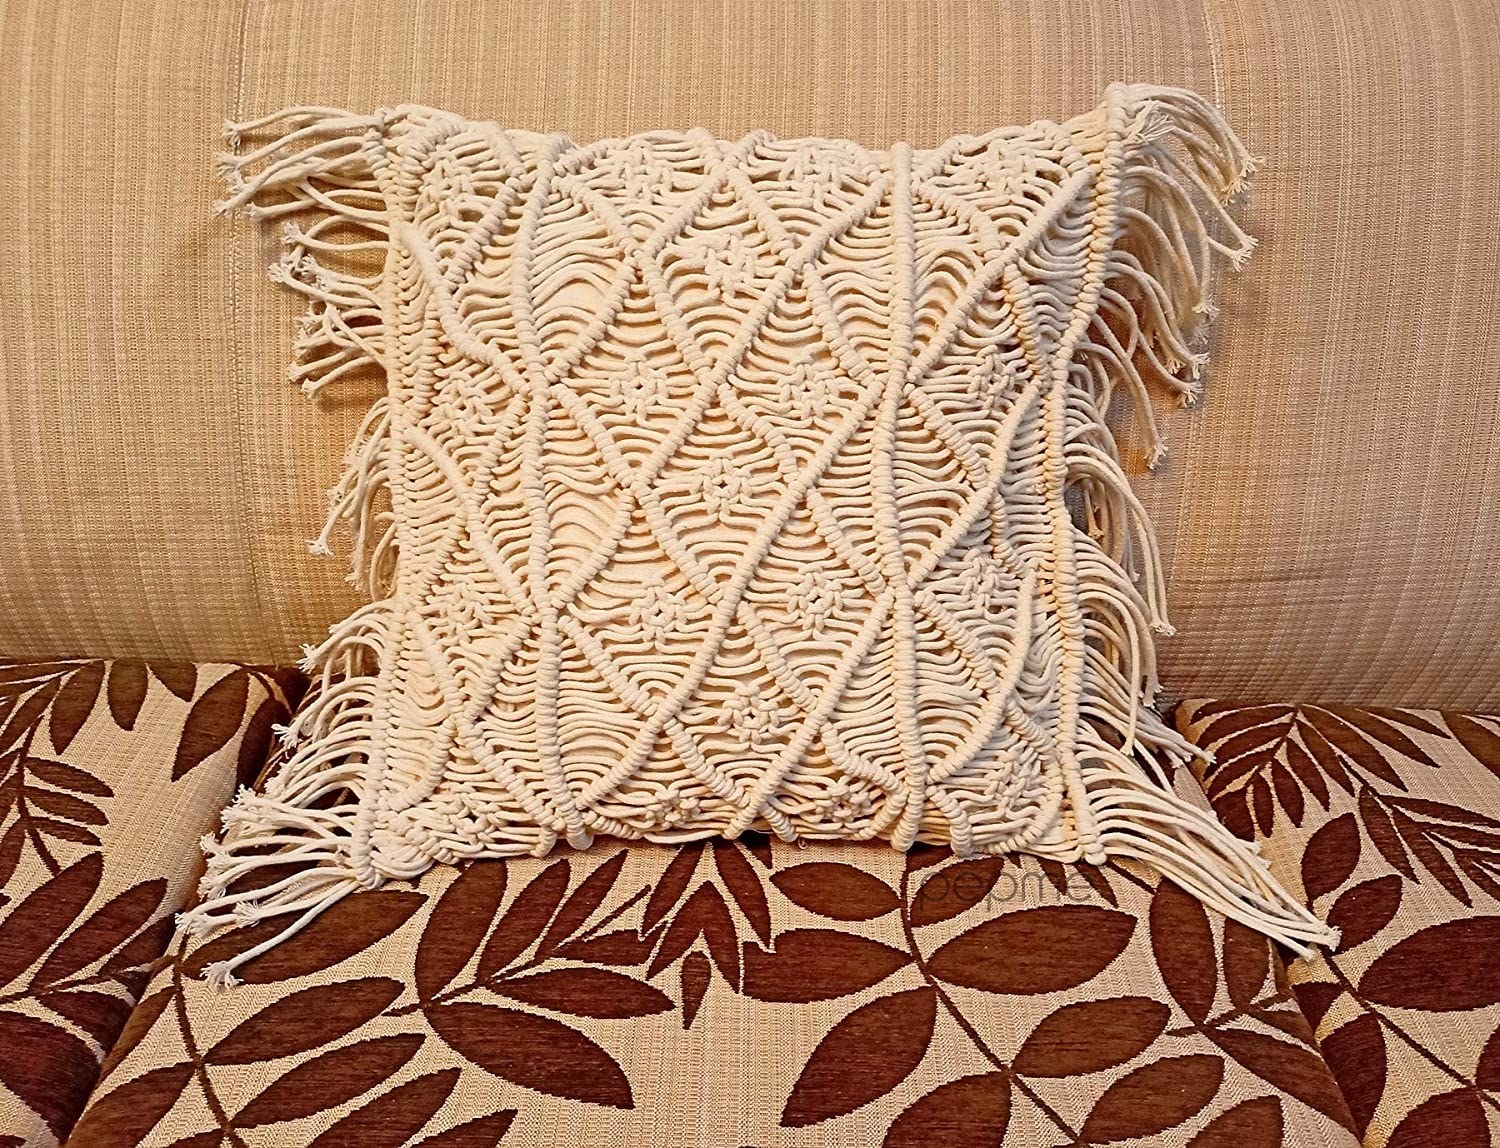 A sofa with a Macrame pillow on it